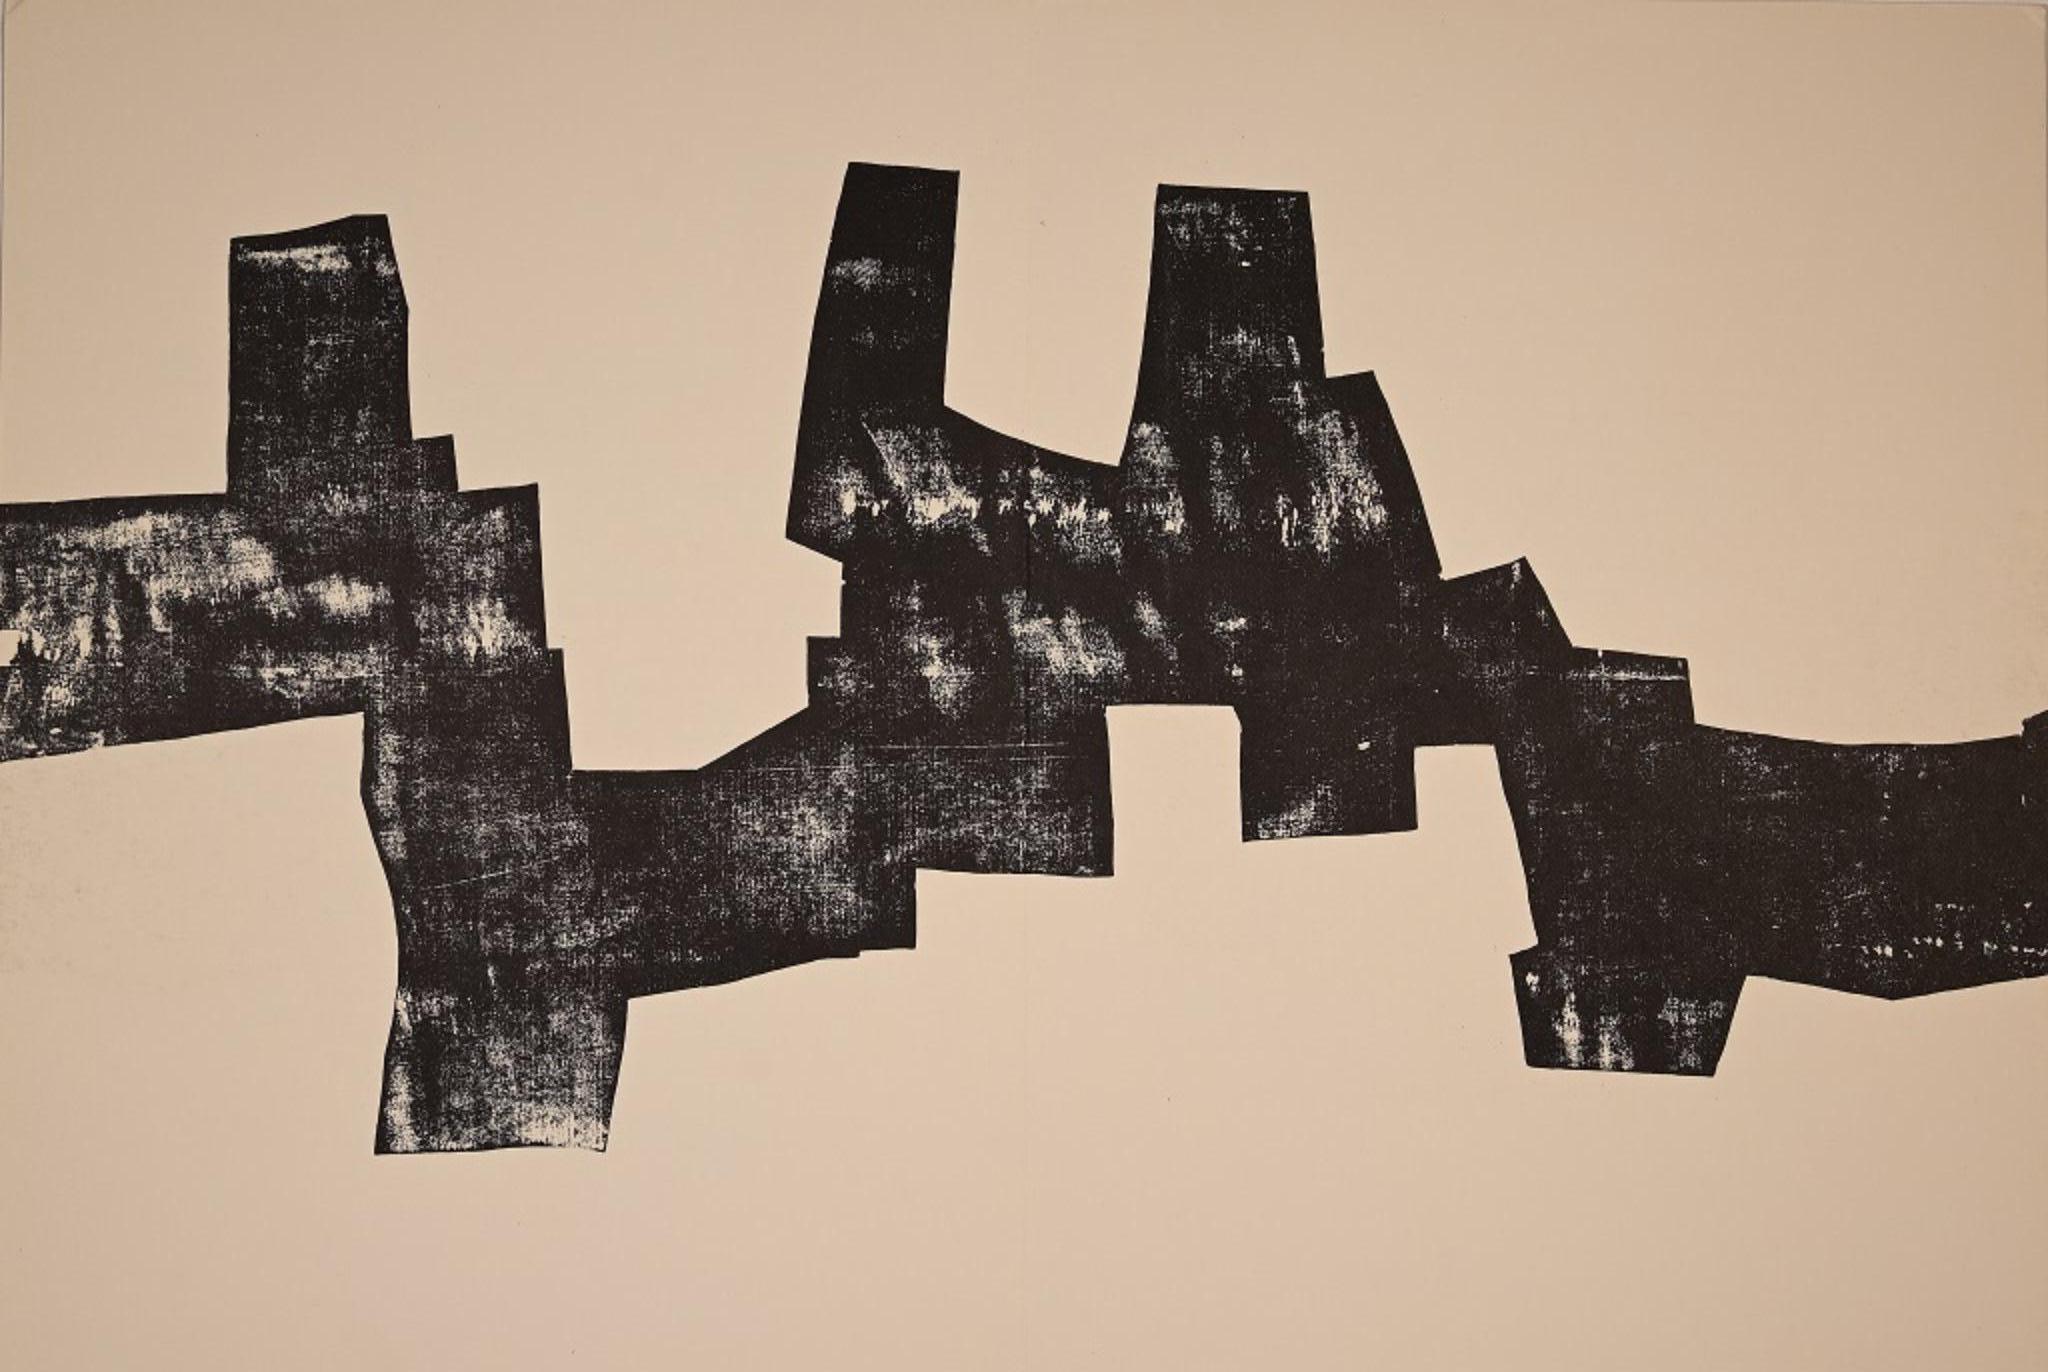 Sakondu  is a mixed lithograph realized by Eduardo Chillida for the Art Magazine Derrière Le Miroir. no. 174.

Printed by Ateliers de Maeght, Paris, 1968.

Good conditions excpet for a light fold in the center which is common to the whole edition.

